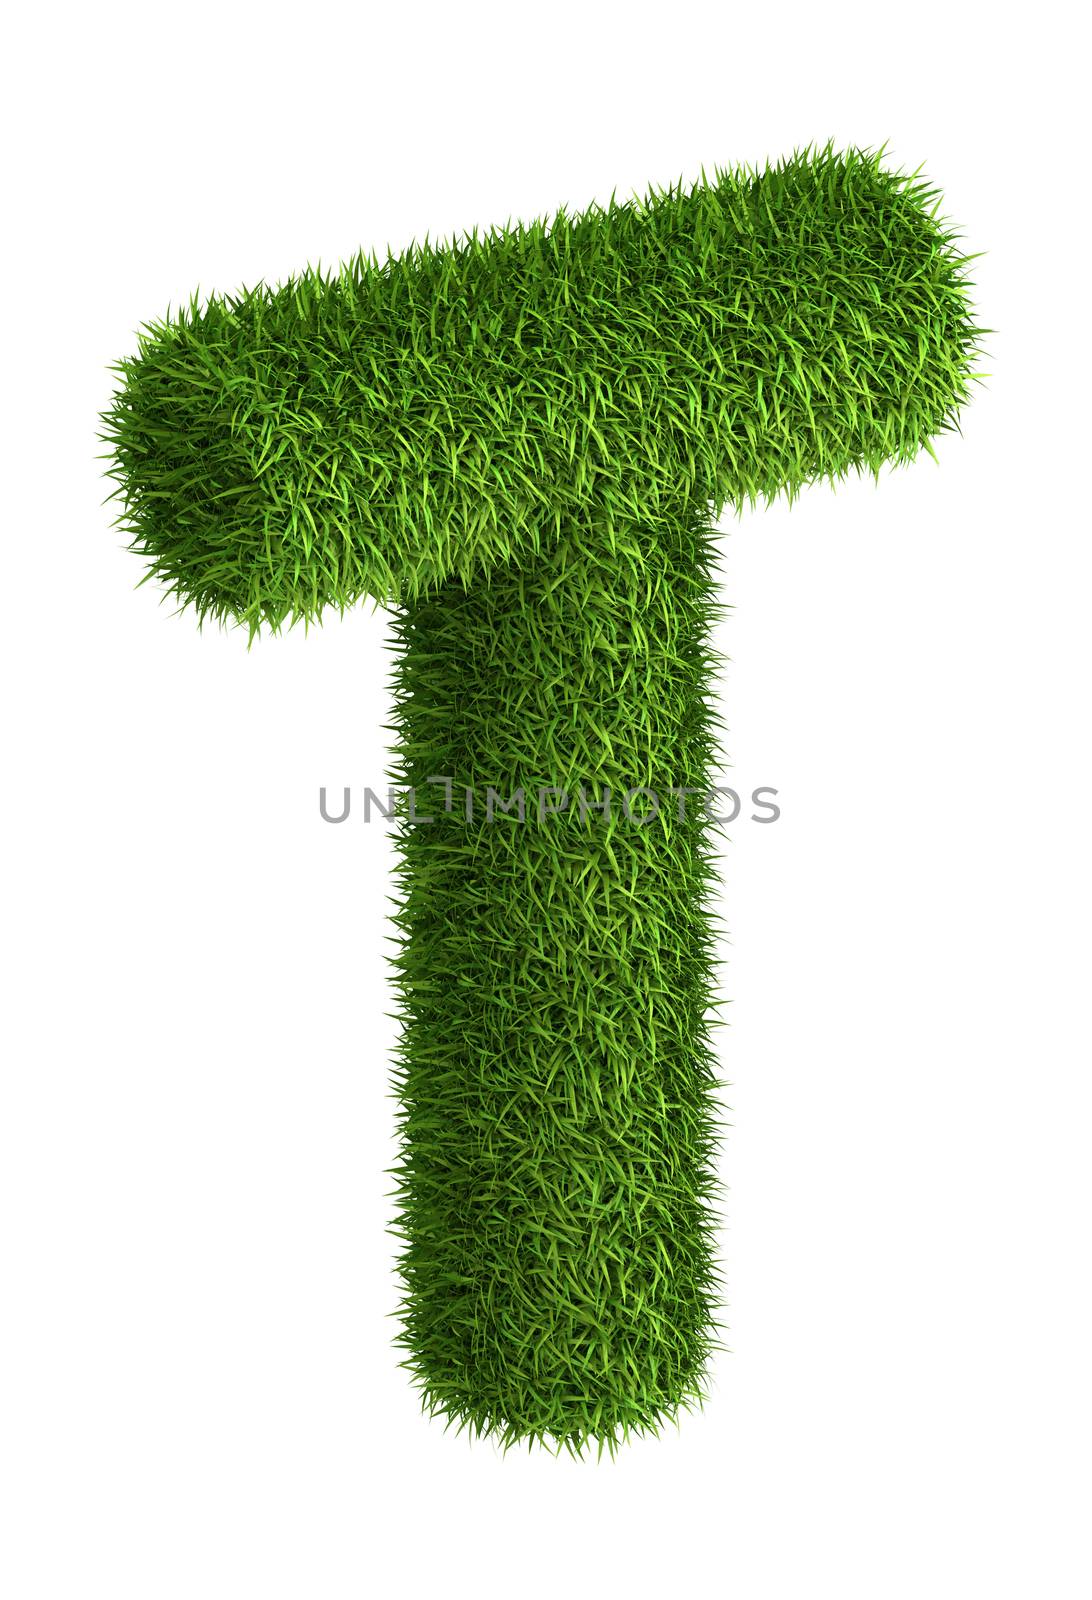 3D Letter T photo realistic isometric projection grass ecology theme on white